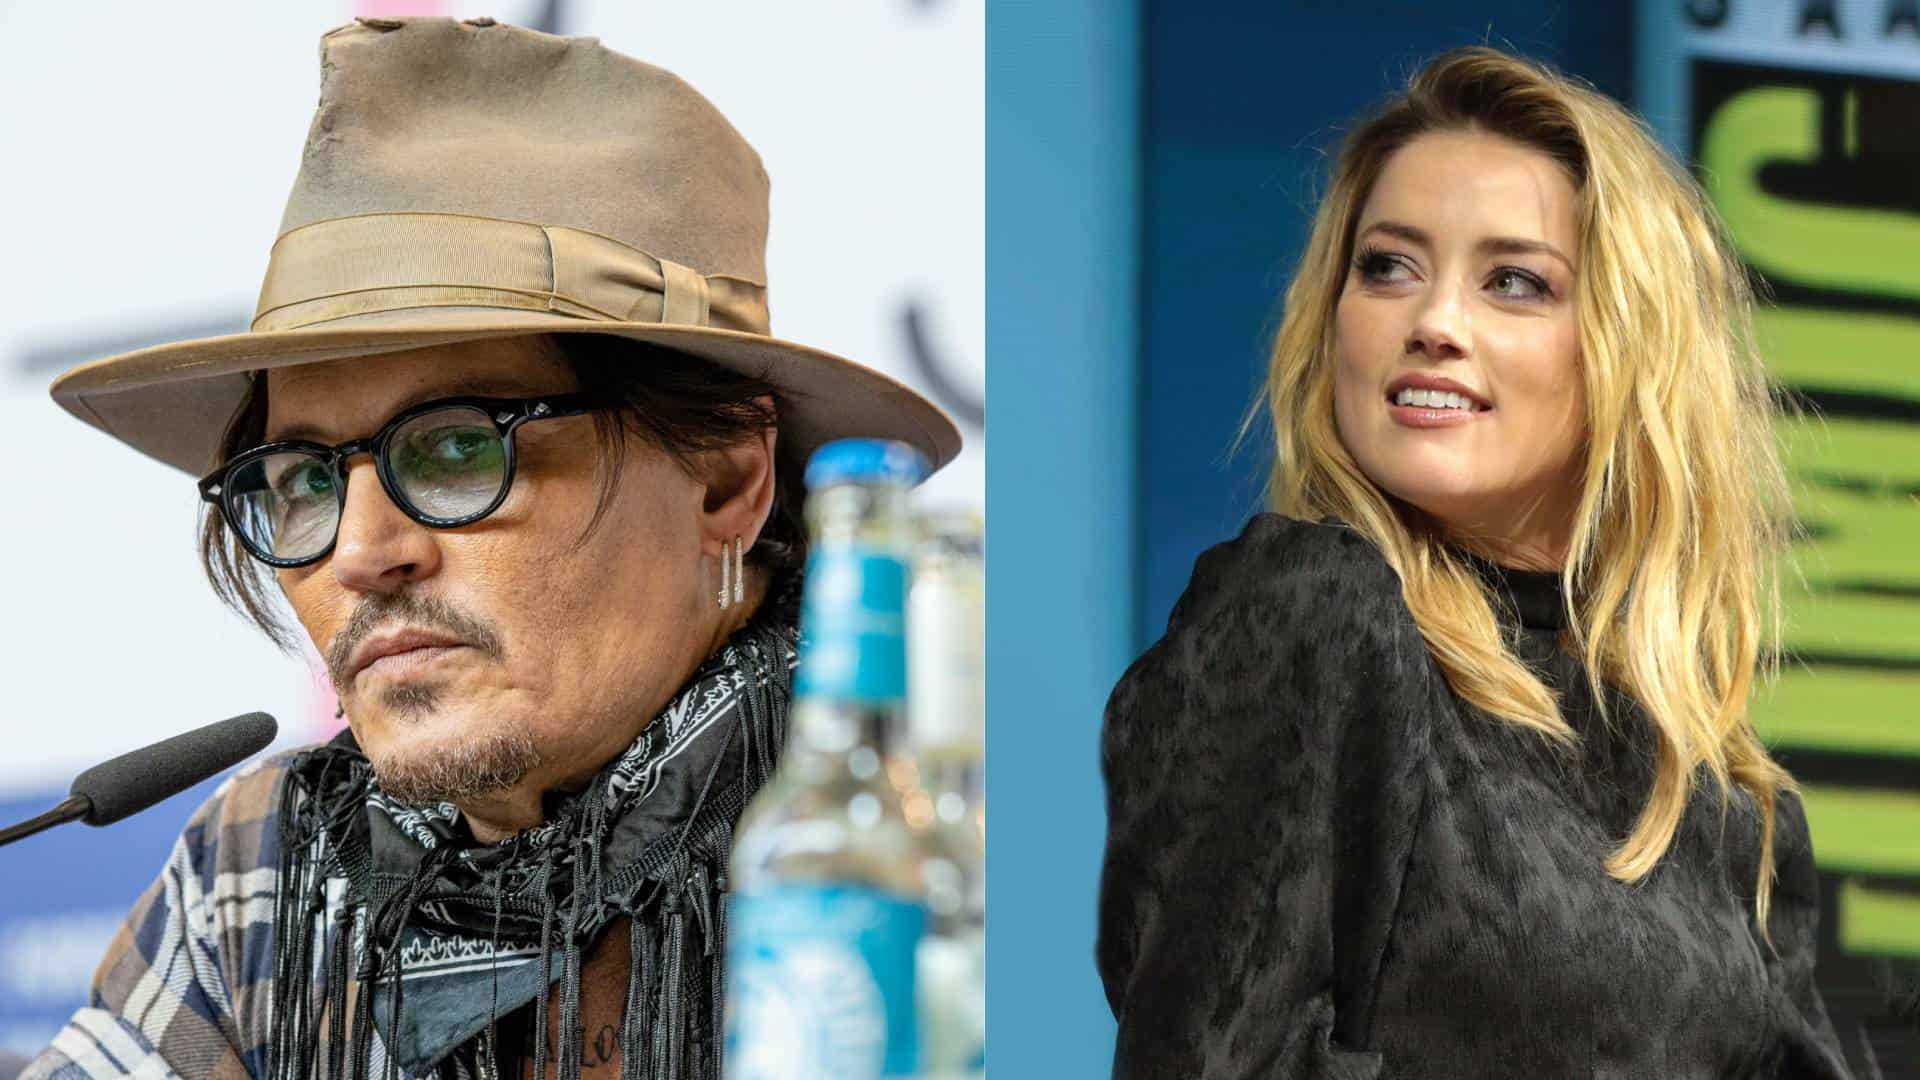 Surgeon_ Johnny Depp's Story About His Severed Finger Has Flaws